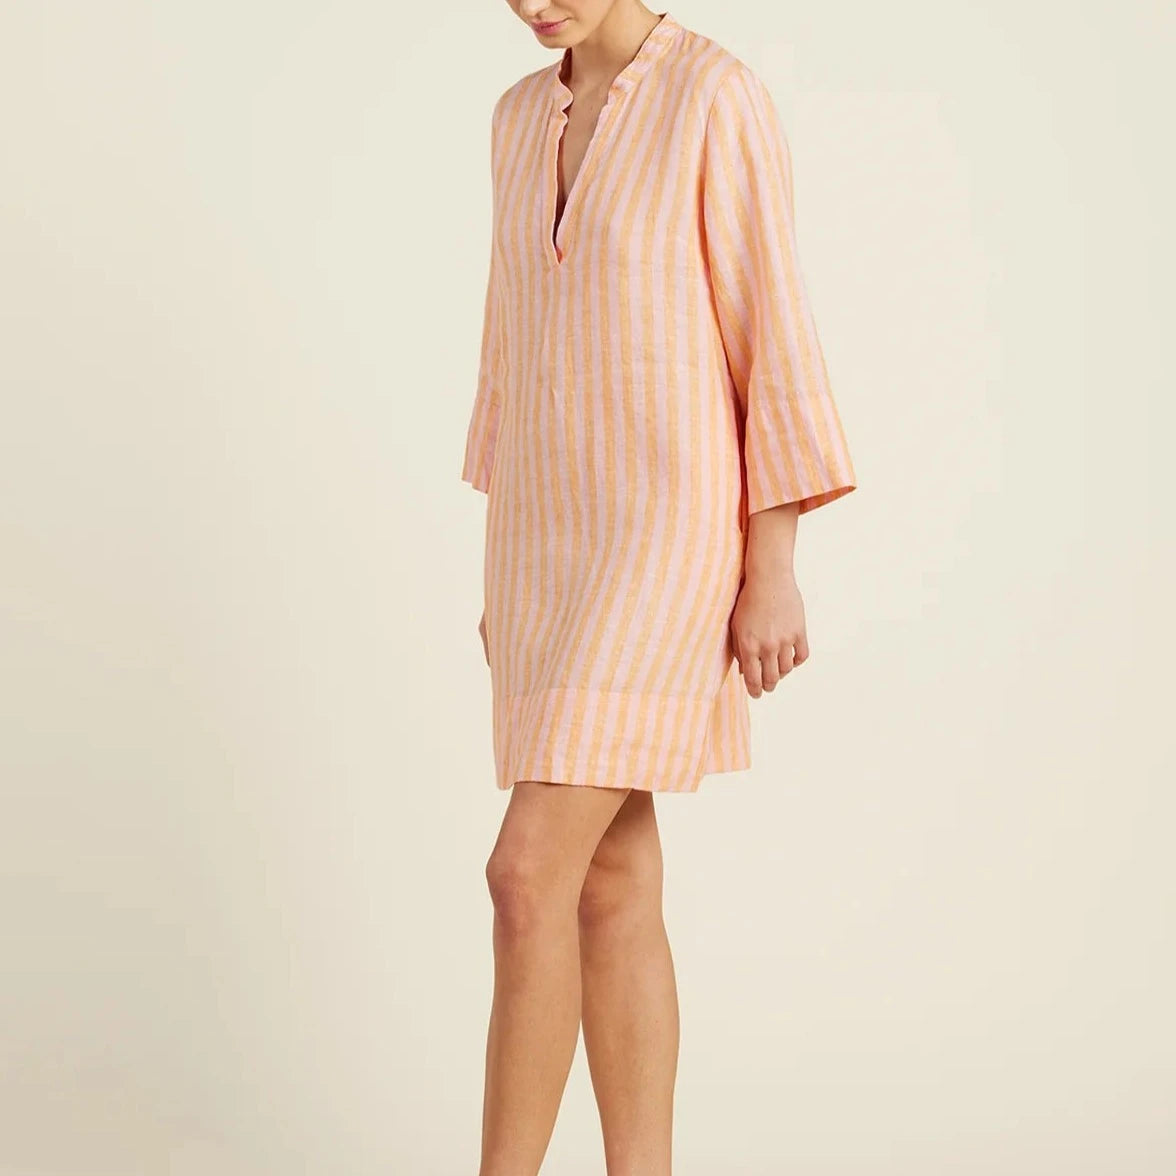 Lucca Shift Dress in Creamsicle Stripe